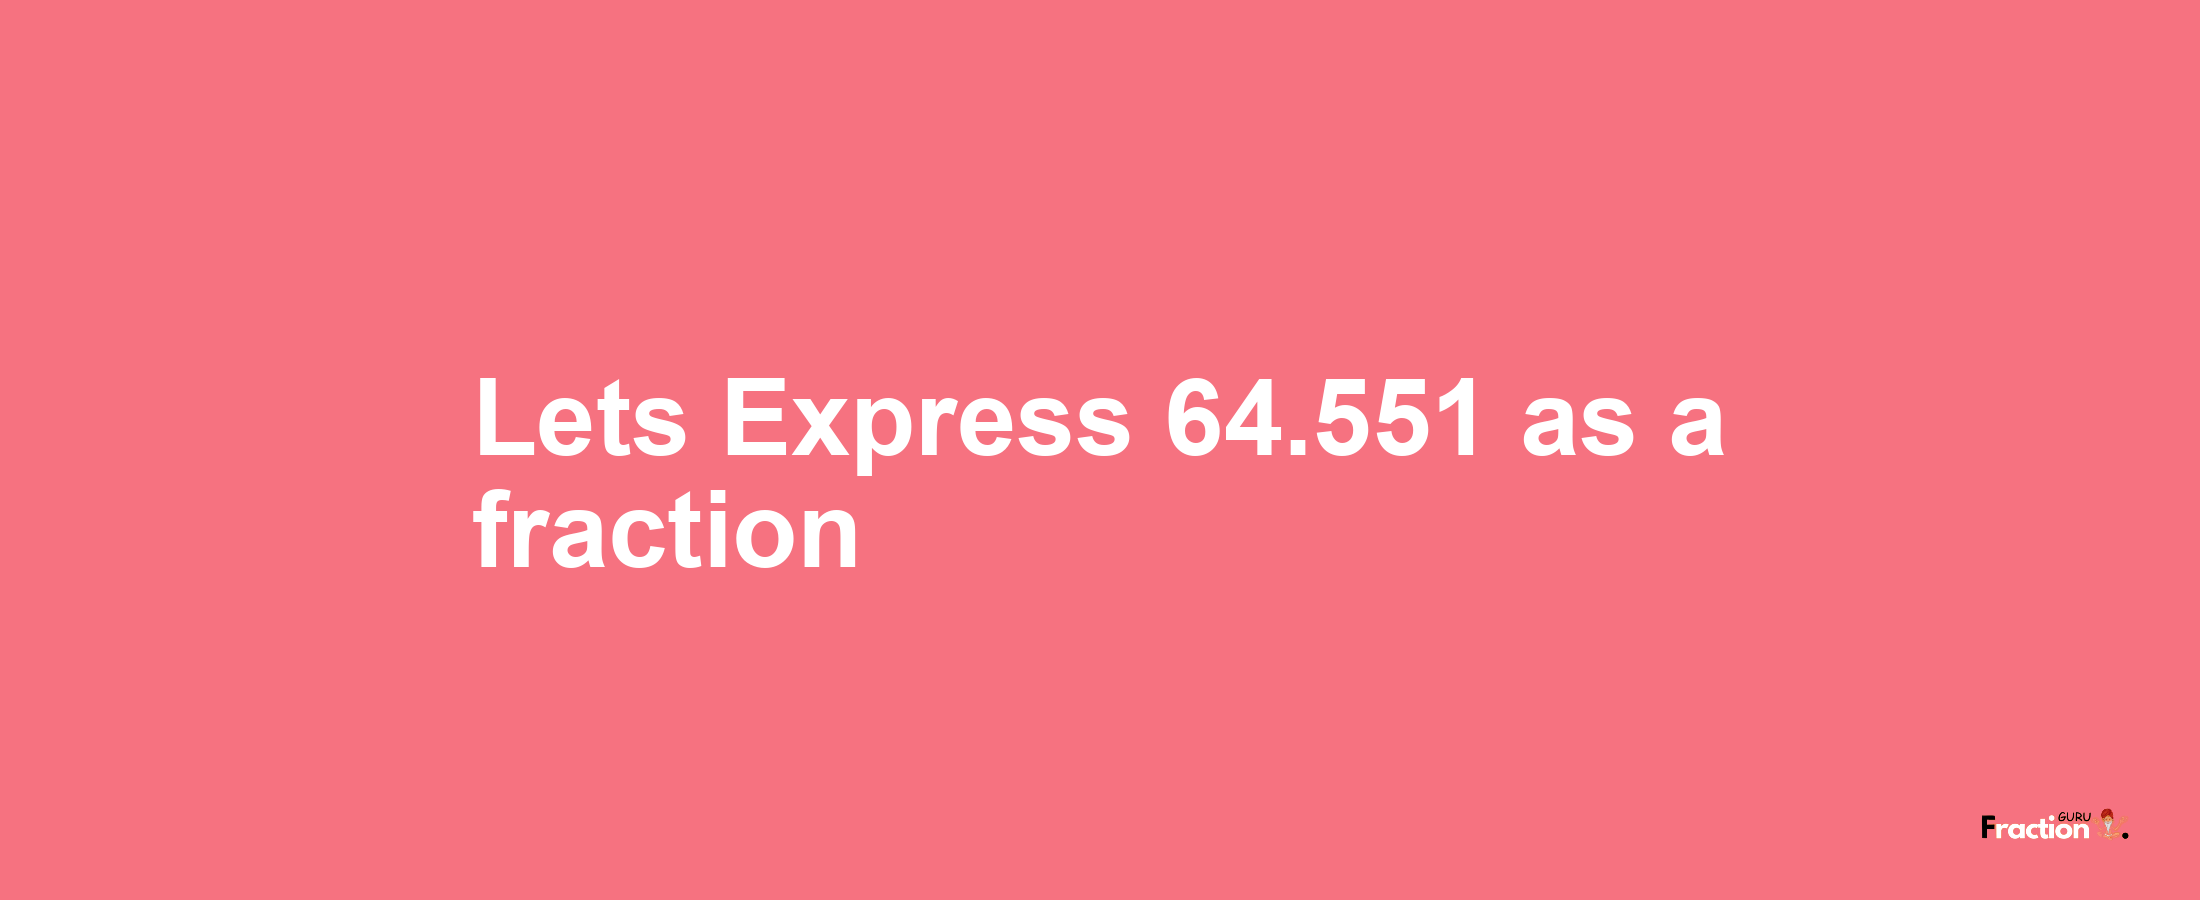 Lets Express 64.551 as afraction